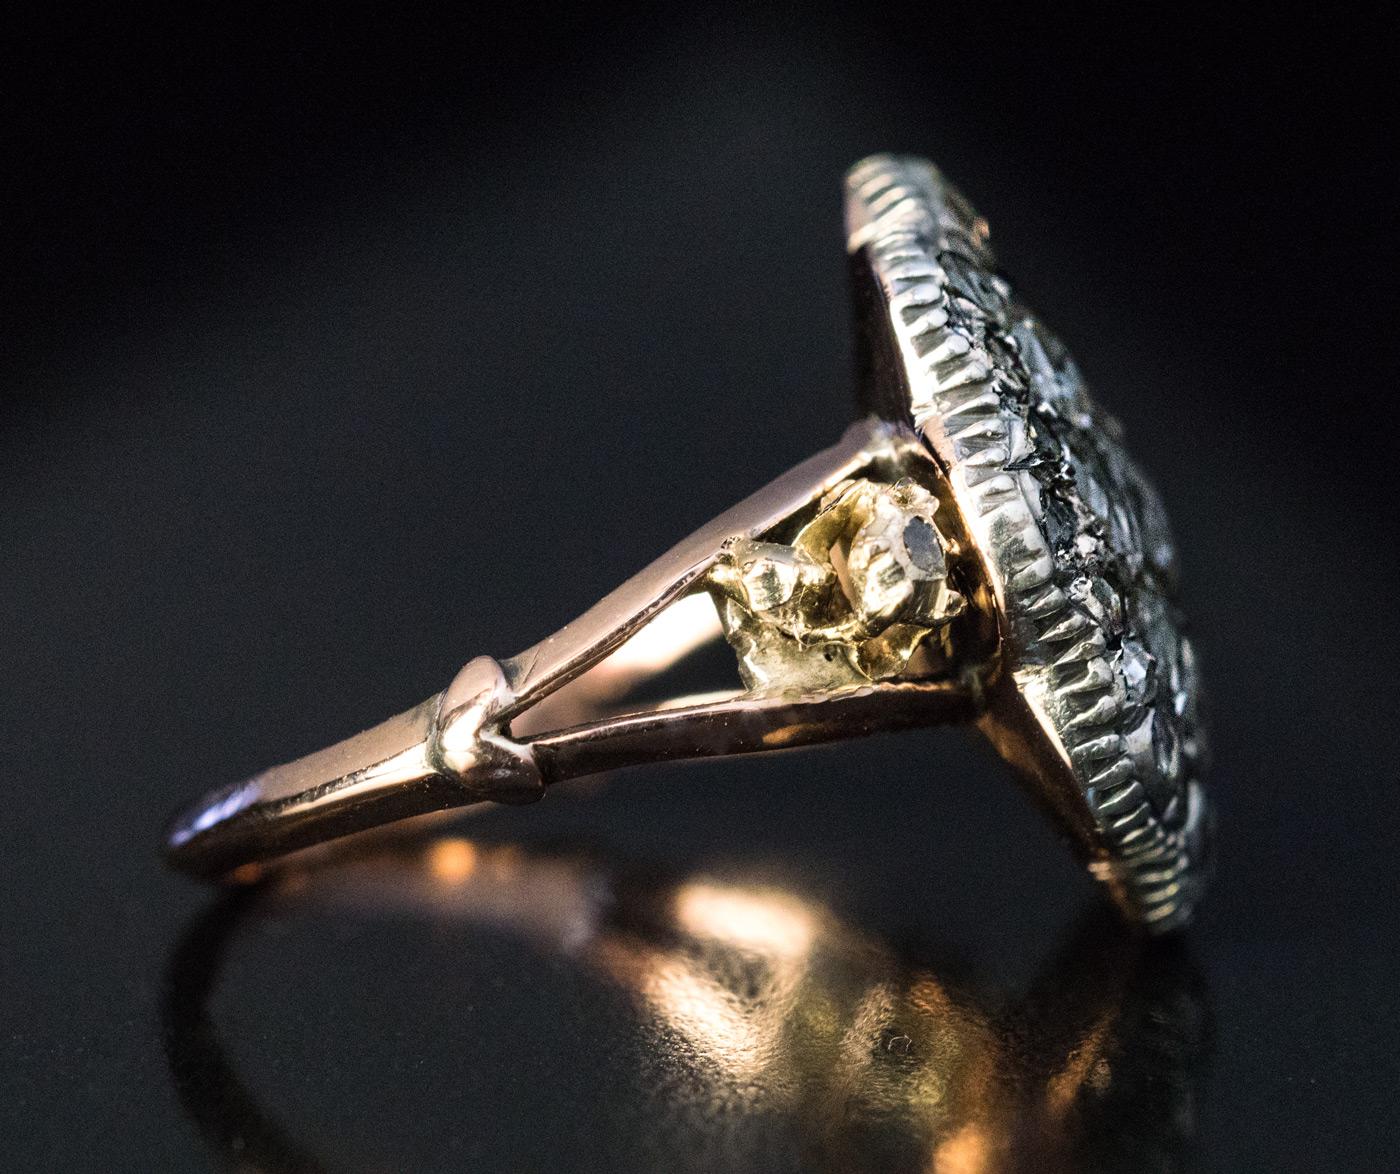 A late 18th century silver-topped gold cluster ring is centered with a 5.6 mm old rose cut diamond encircled by two rows of rose cut diamonds of various shapes and sizes. The diamonds are set in a closed back setting.

Diameter of the diamond